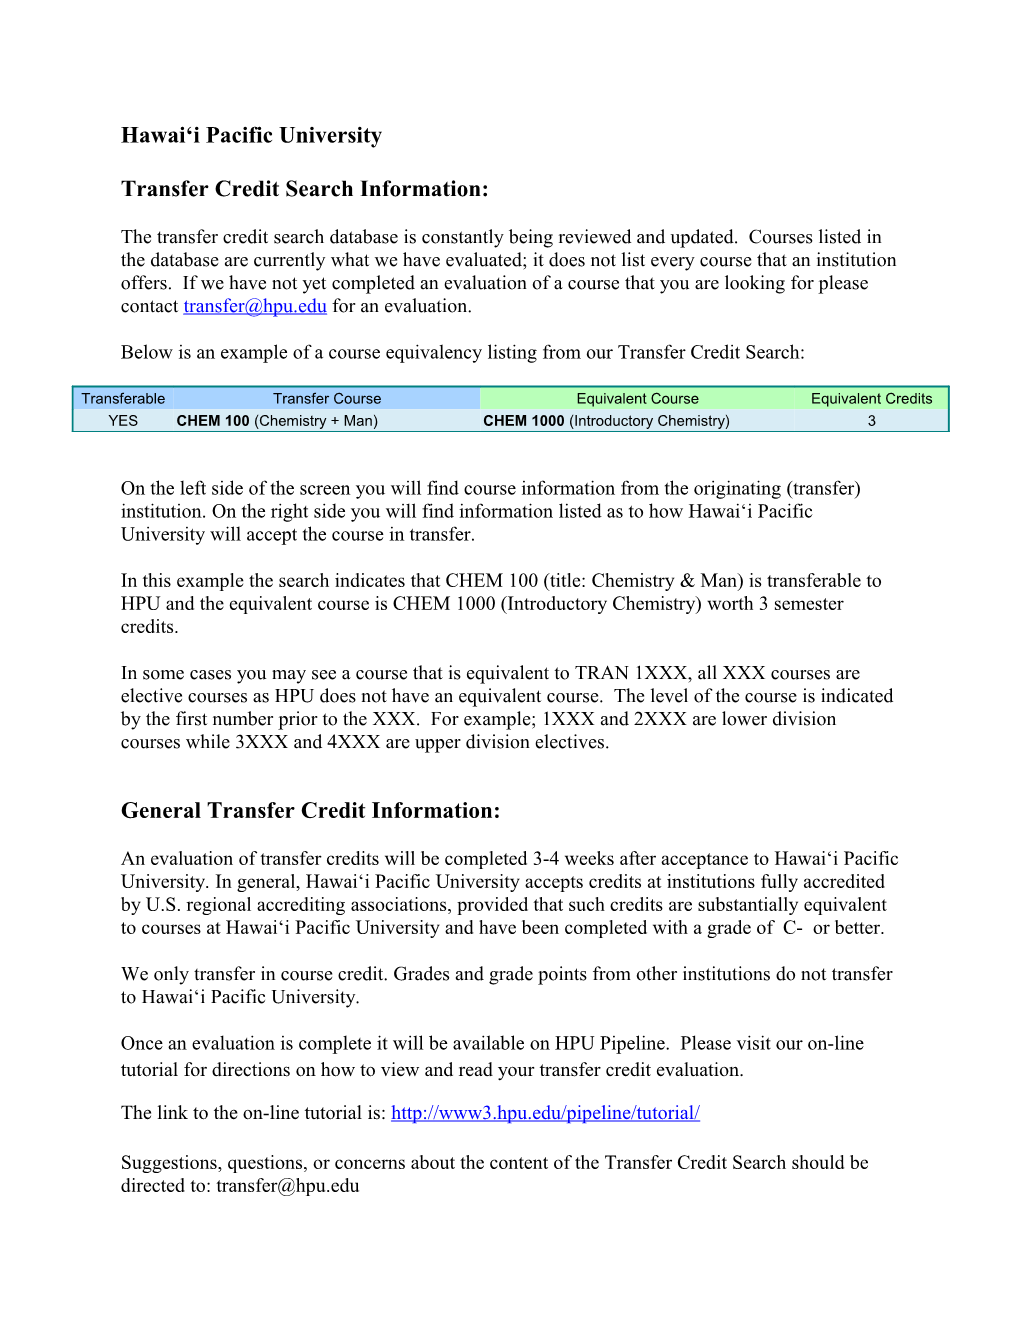 Transfer Credit Search Information